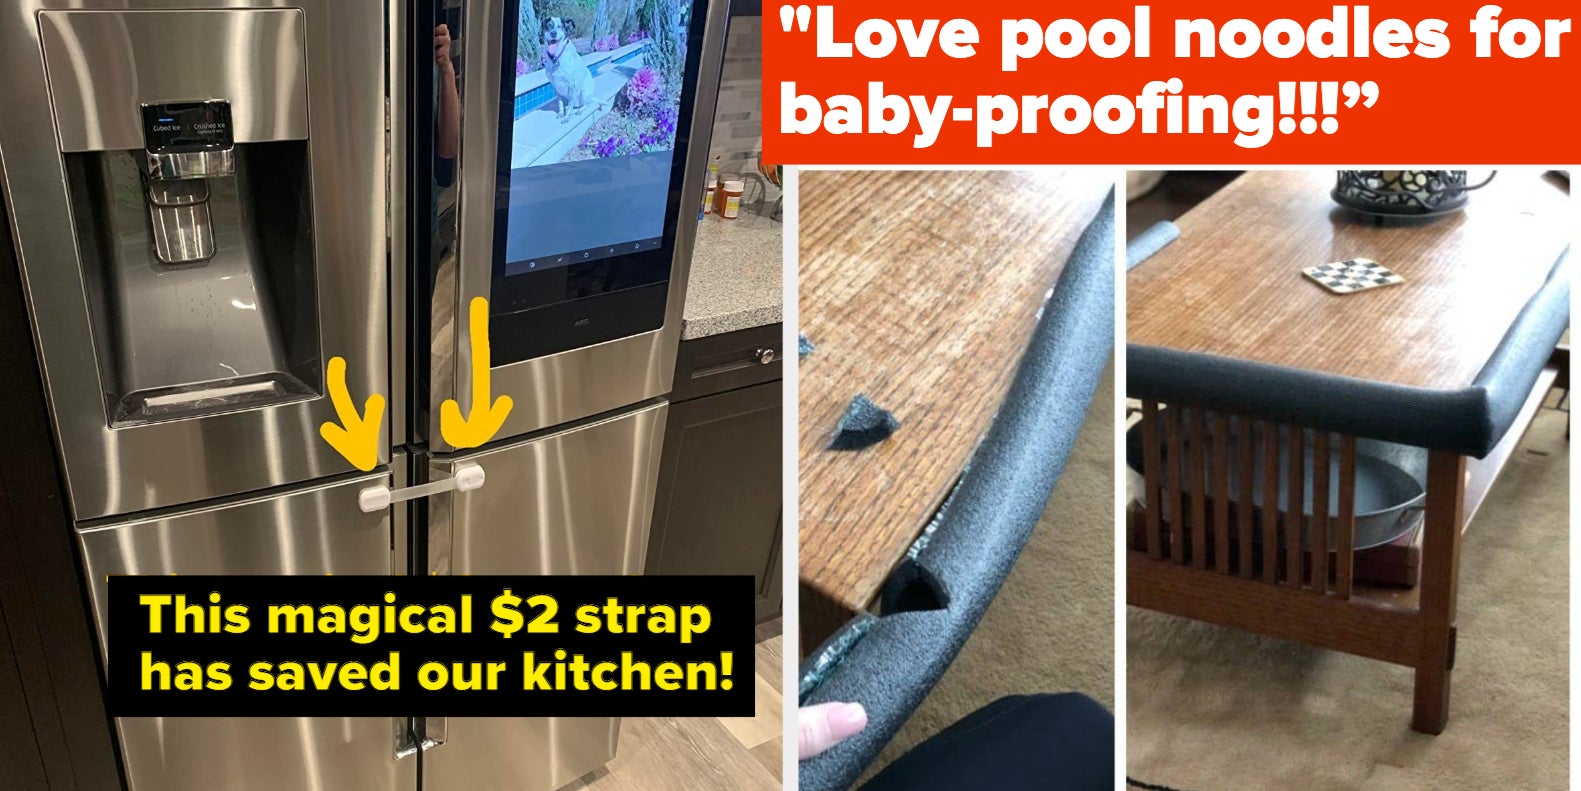 15 Simple Yet Effective Tips To Baby Proof Your Kitchen – The Baby Lodge